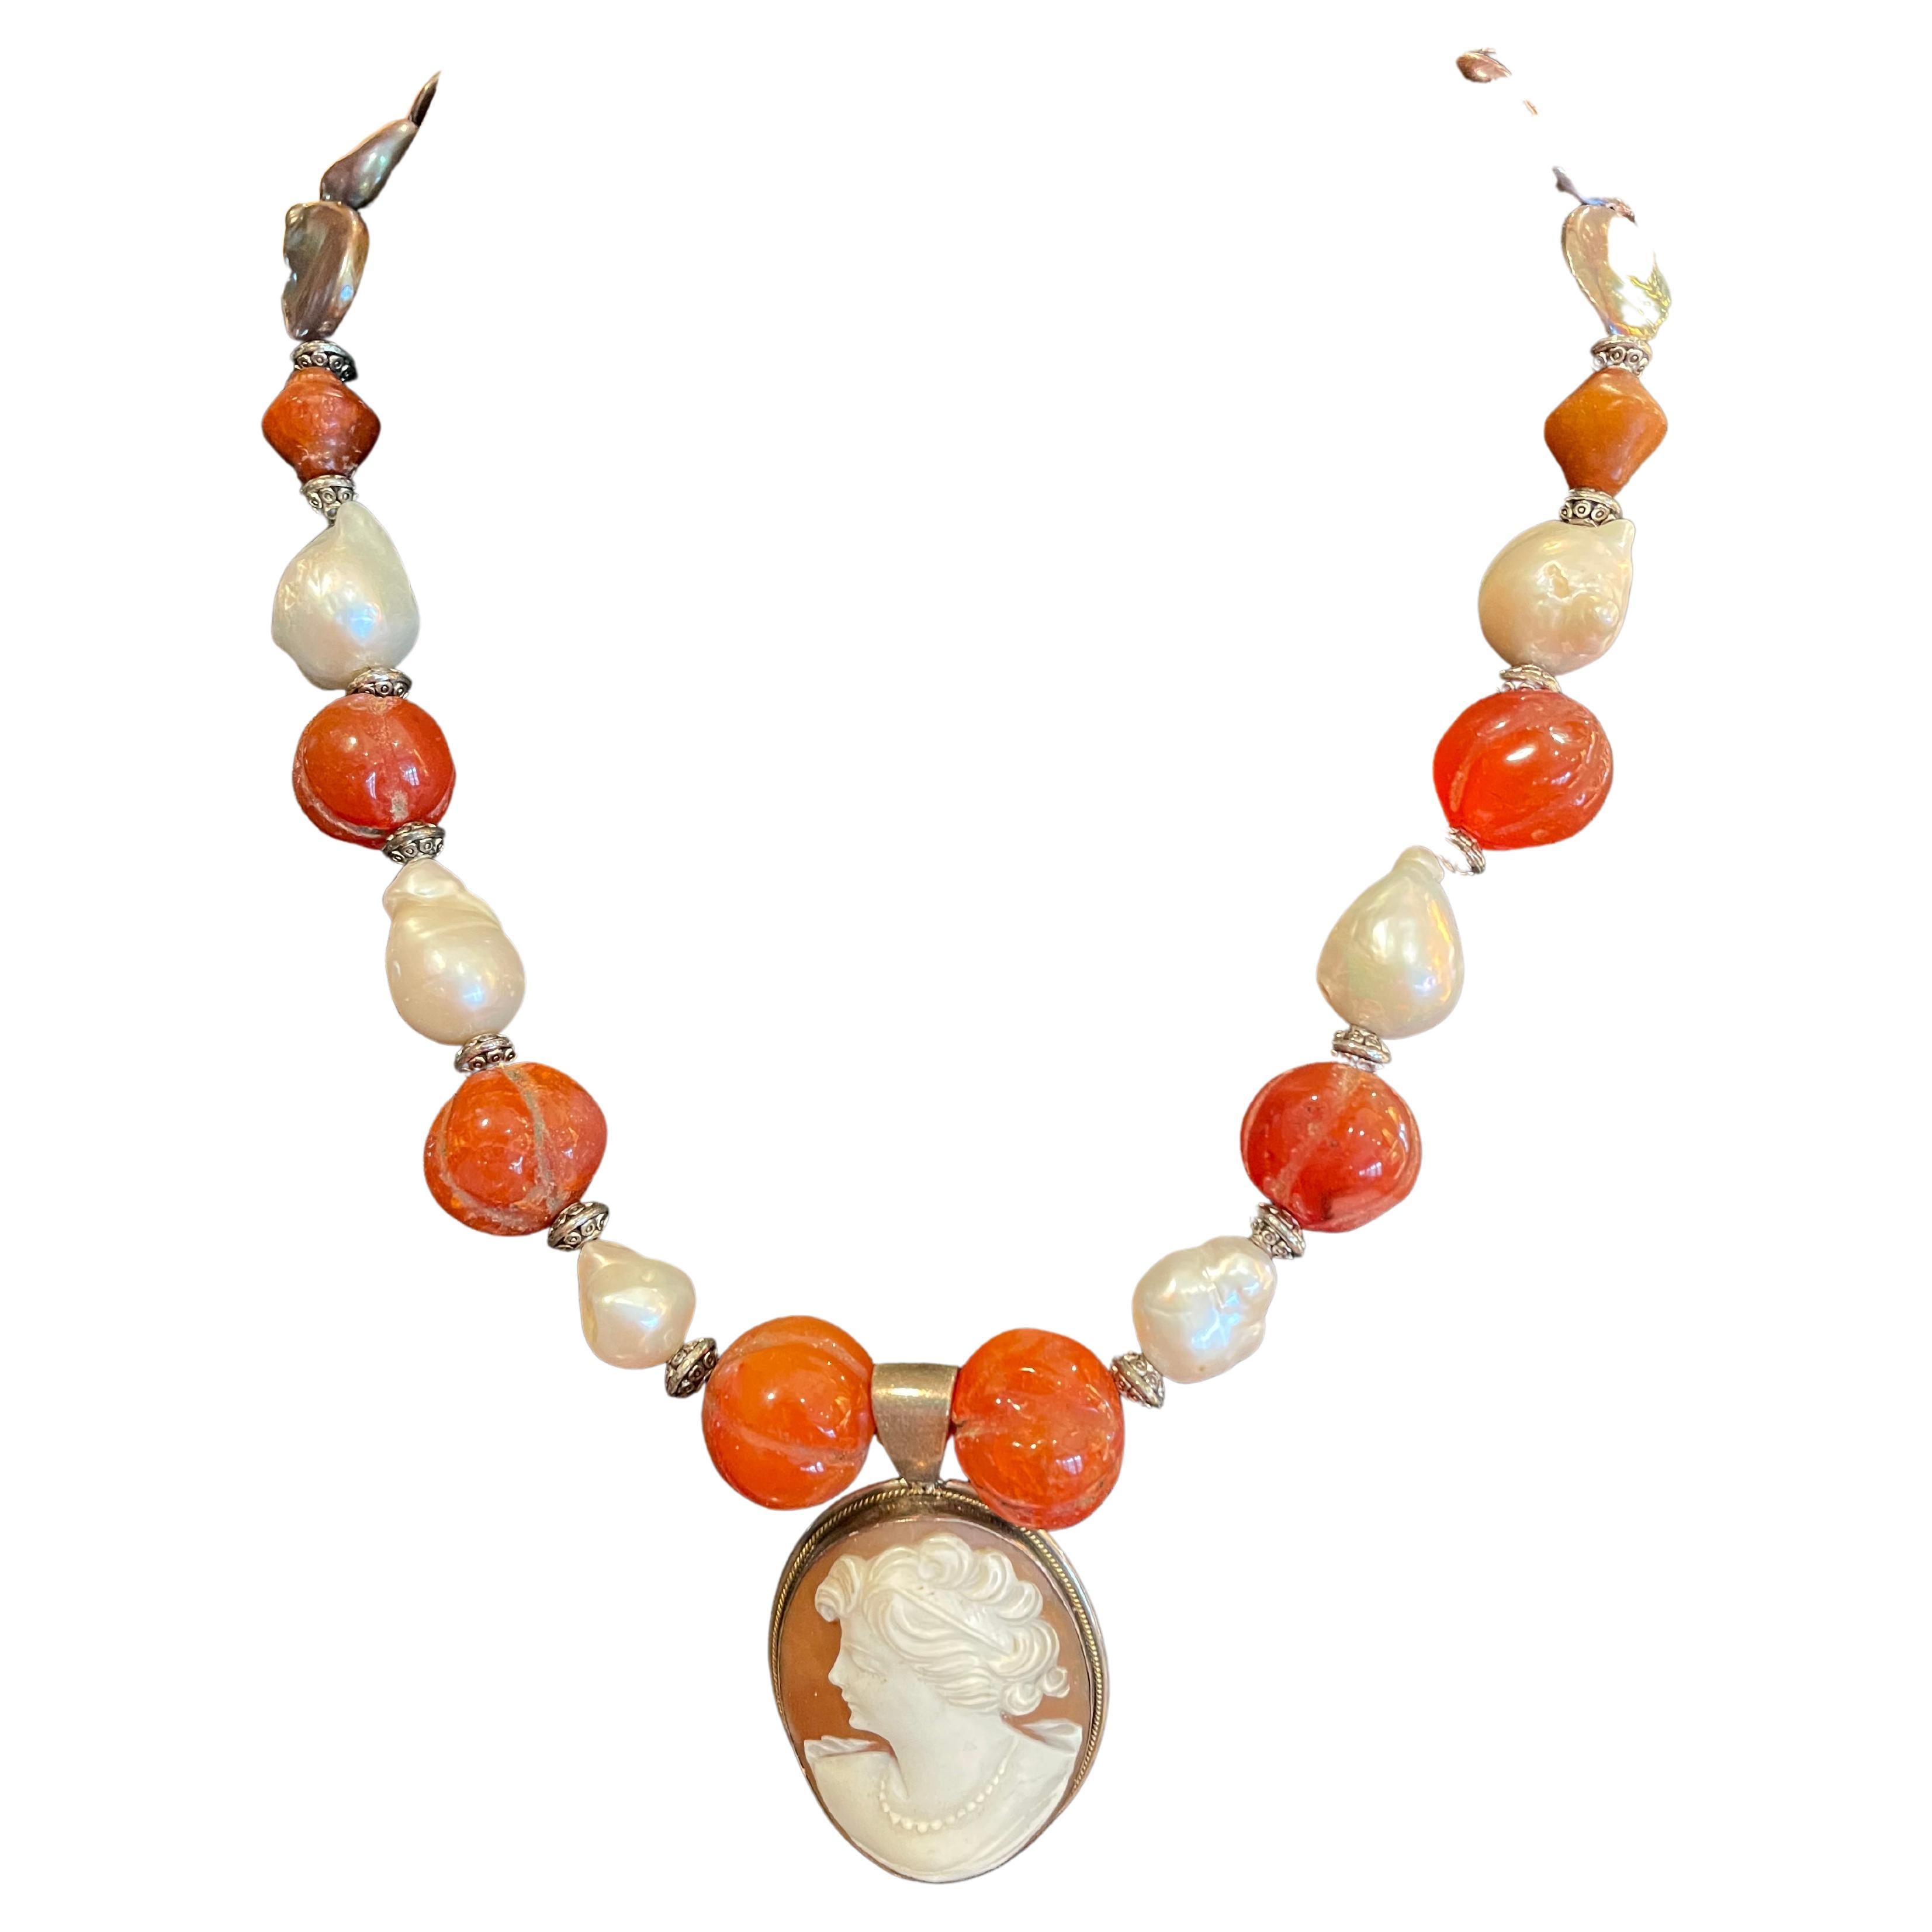 Vintage Italian cameo, baroque pearls, carved carnelian, one of a kind necklace